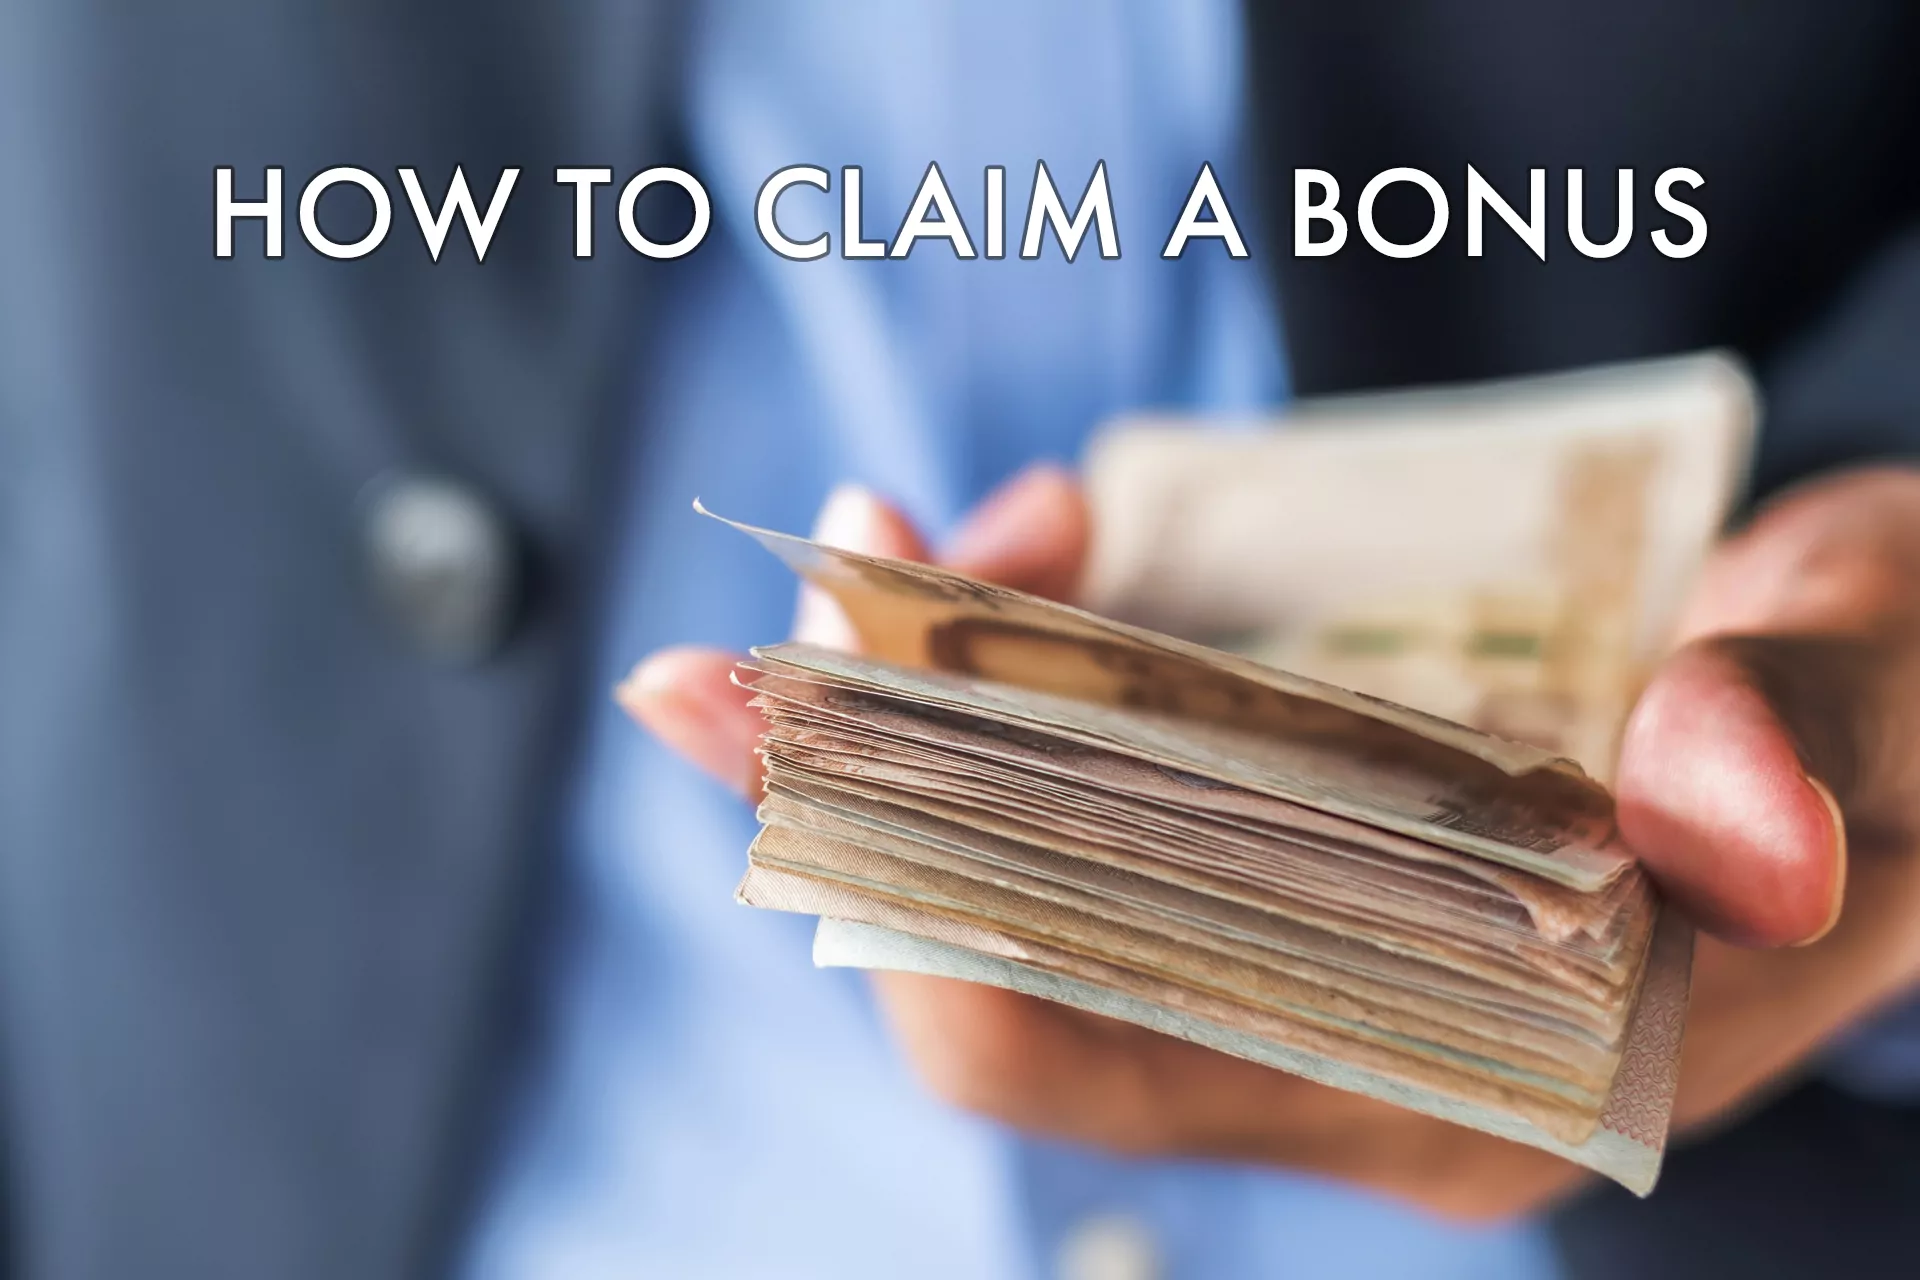 You can claim a bonus in a registration form, or on the page of promotion offers.